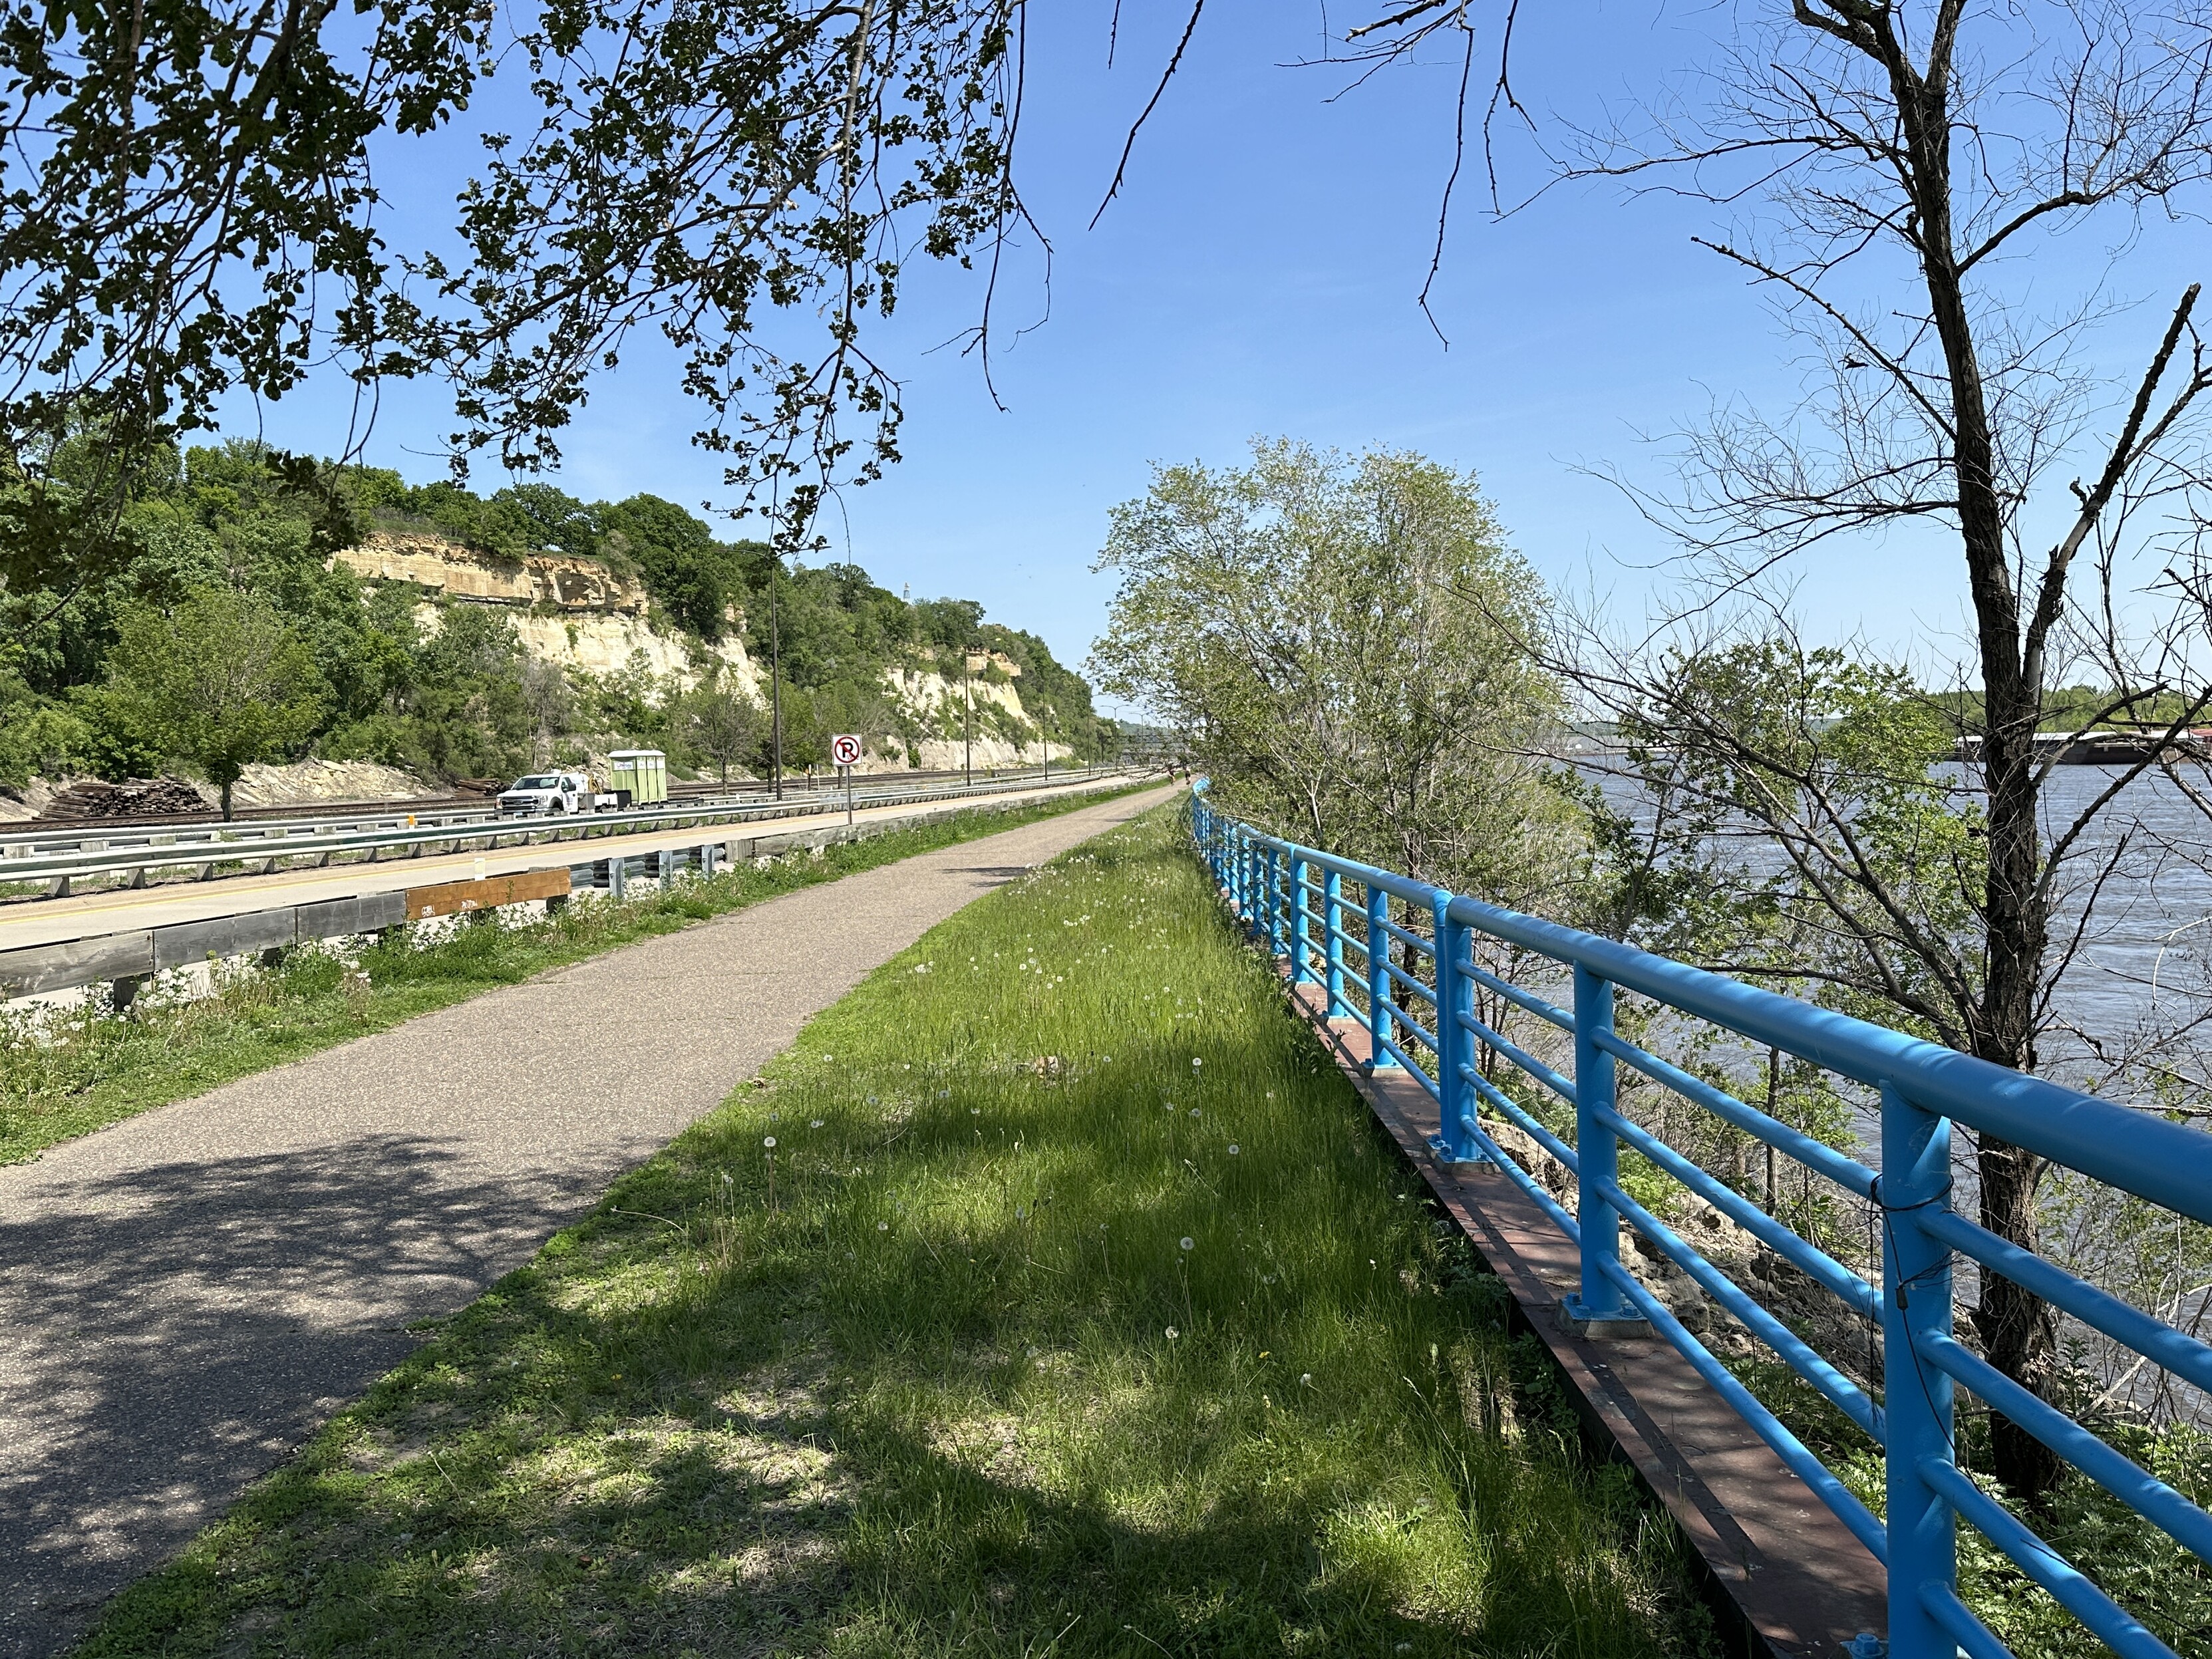 Road with truck on left, bike path in the middle, blue railing, then Mississippi River on the right